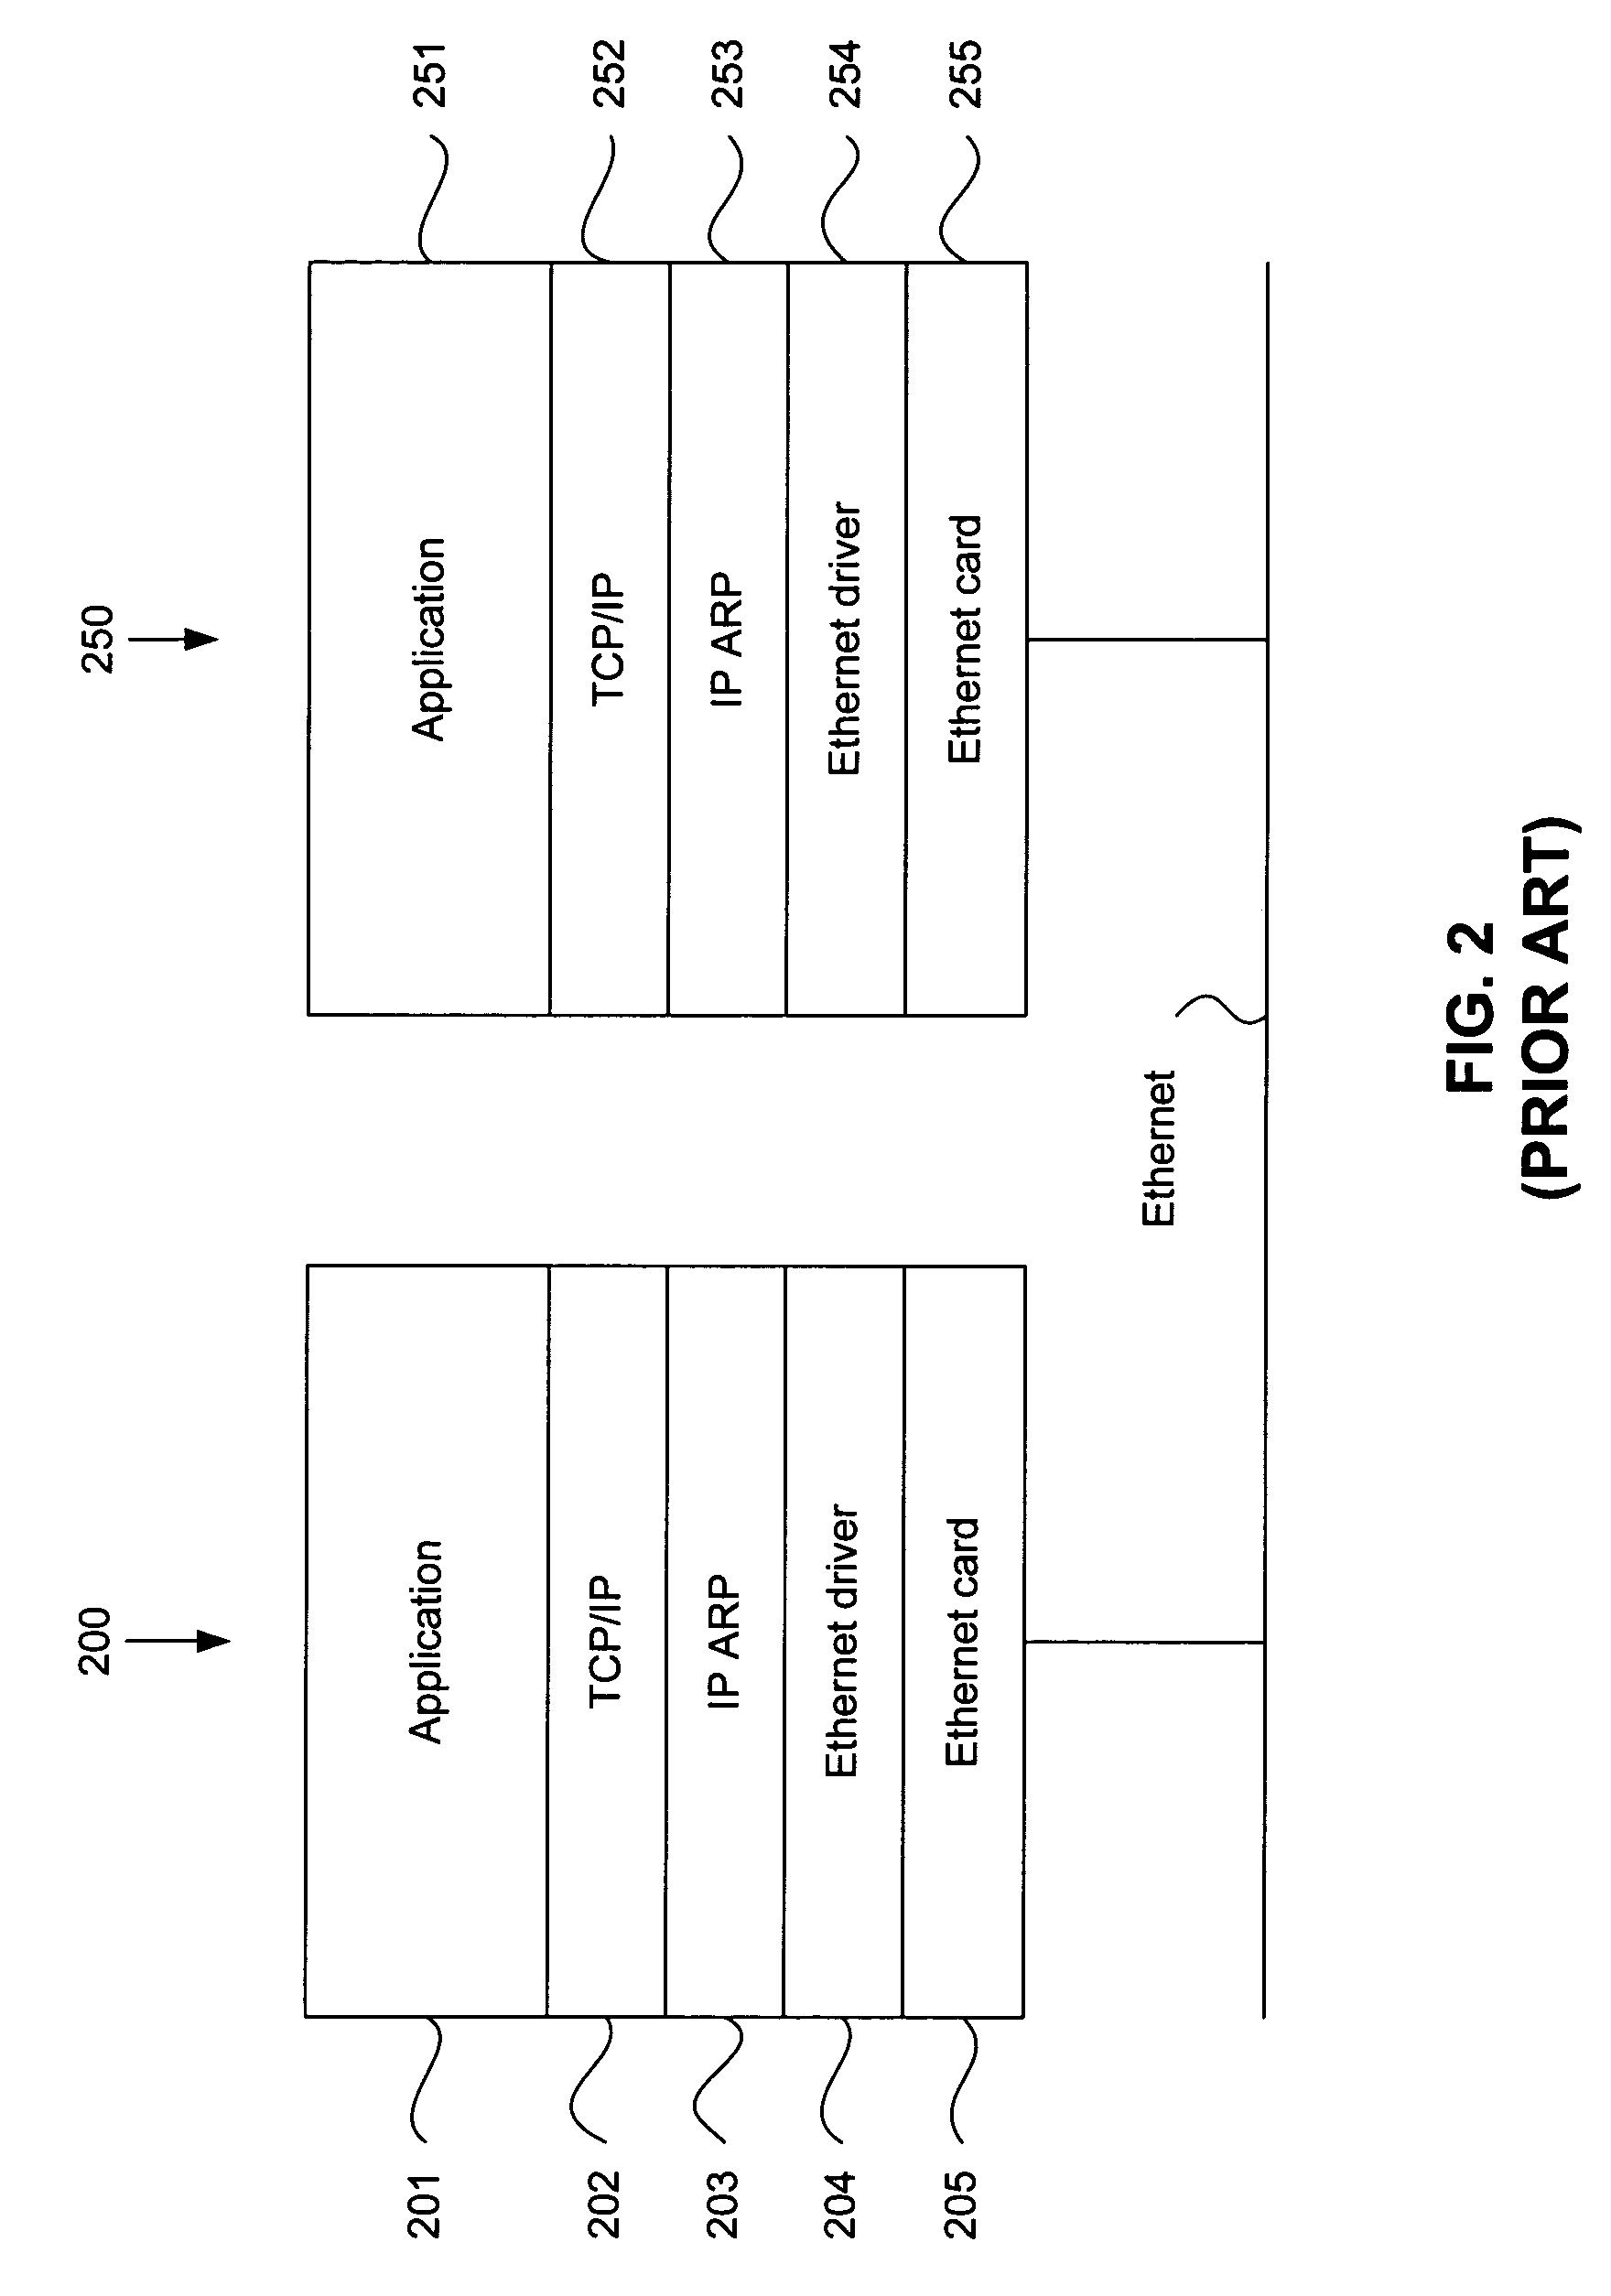 Method and apparatus for emulating ethernet functionality over a serial bus